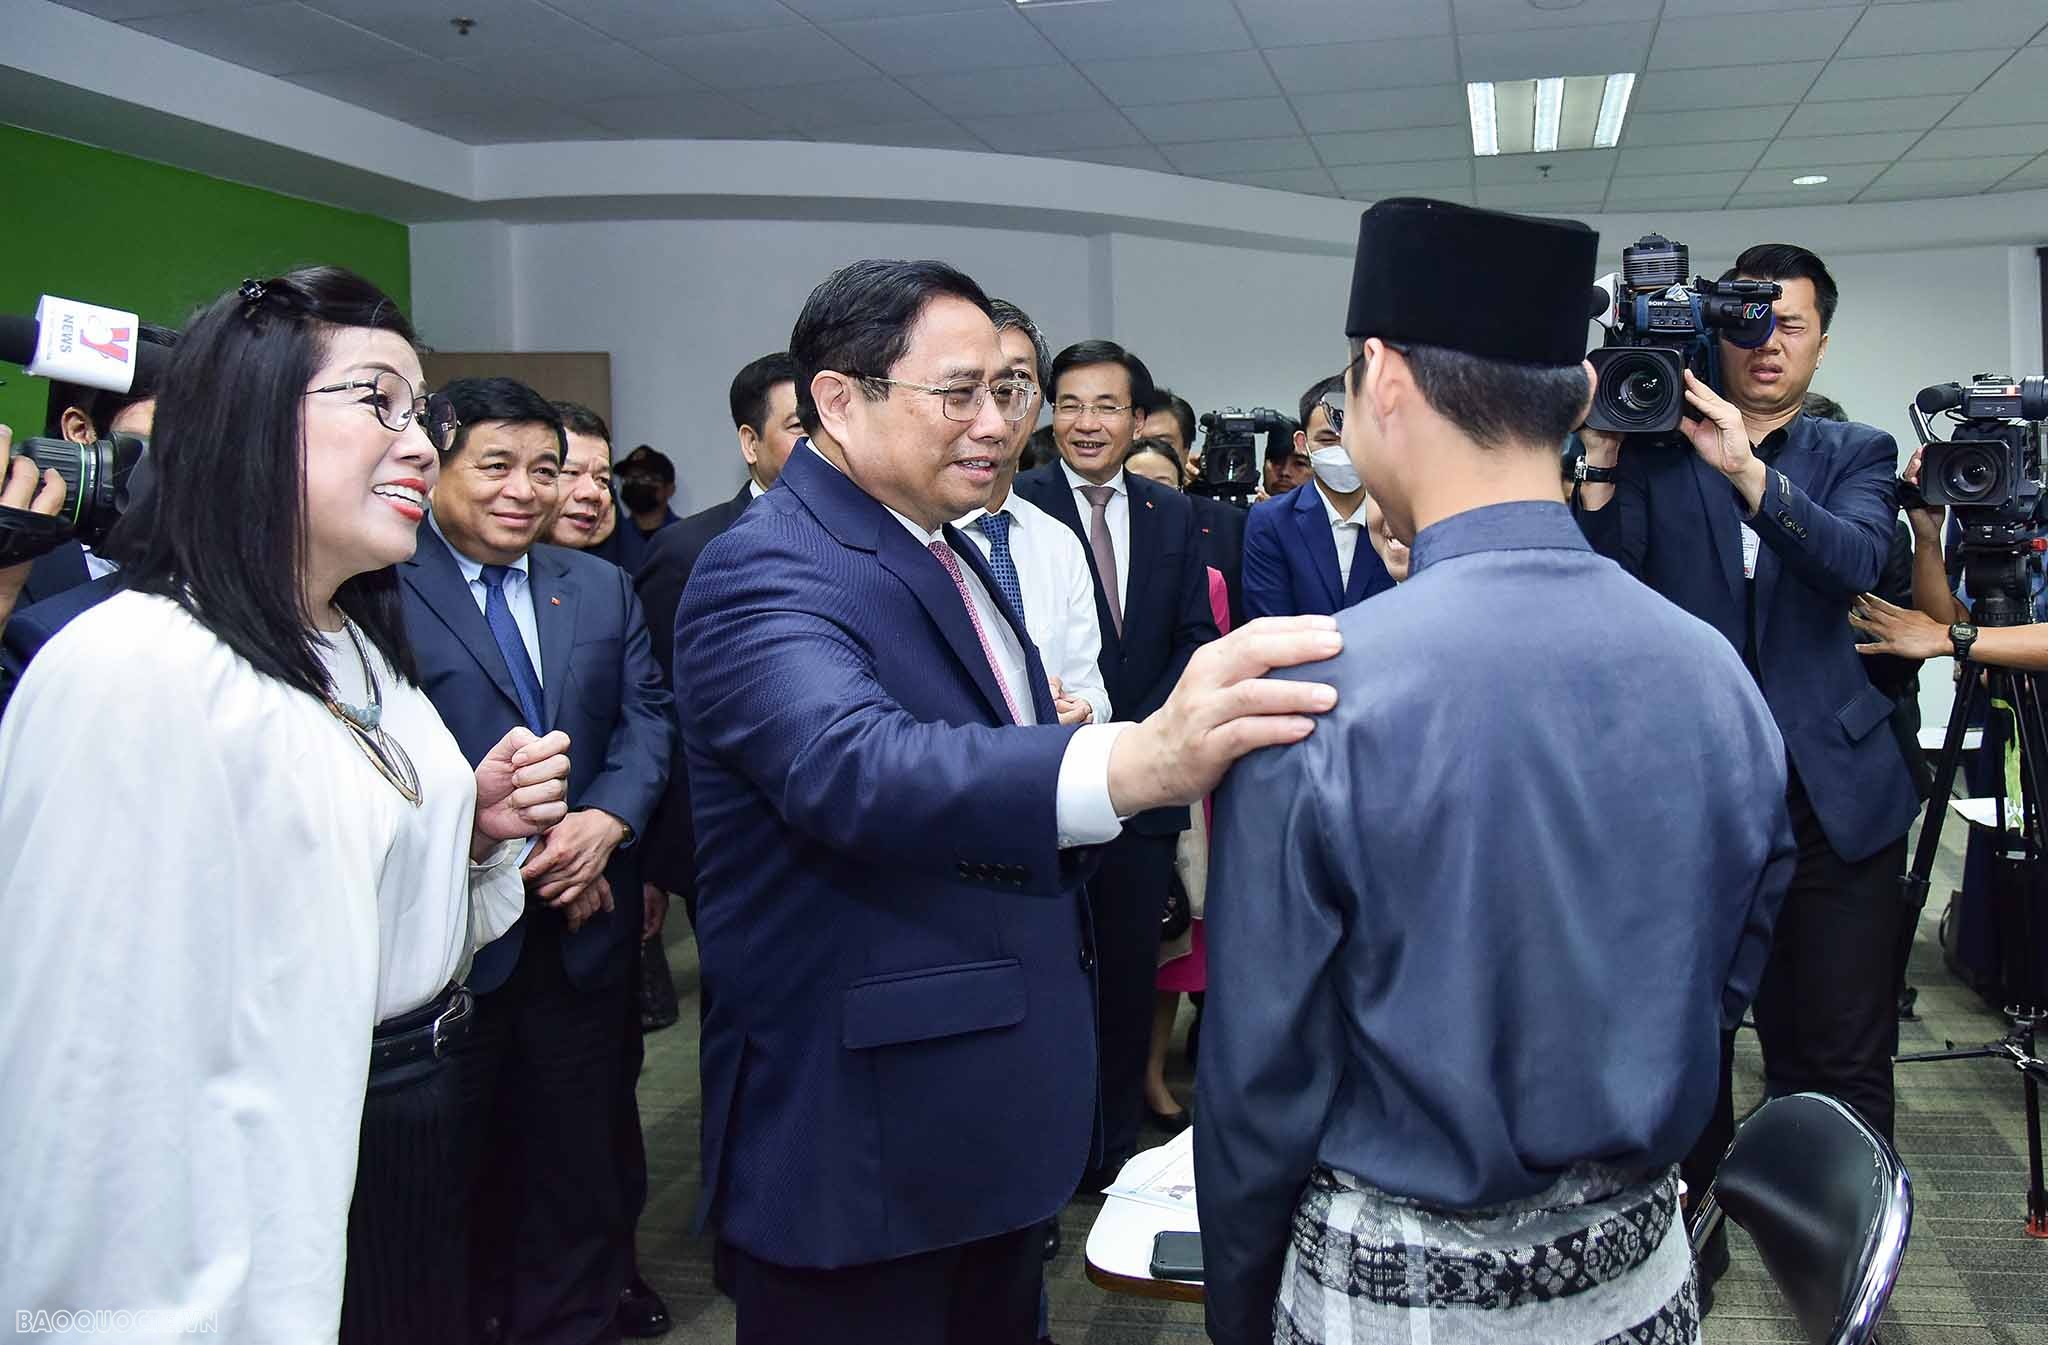 Prime Minister Pham Minh Chinh visits University of Brunei Darussalam